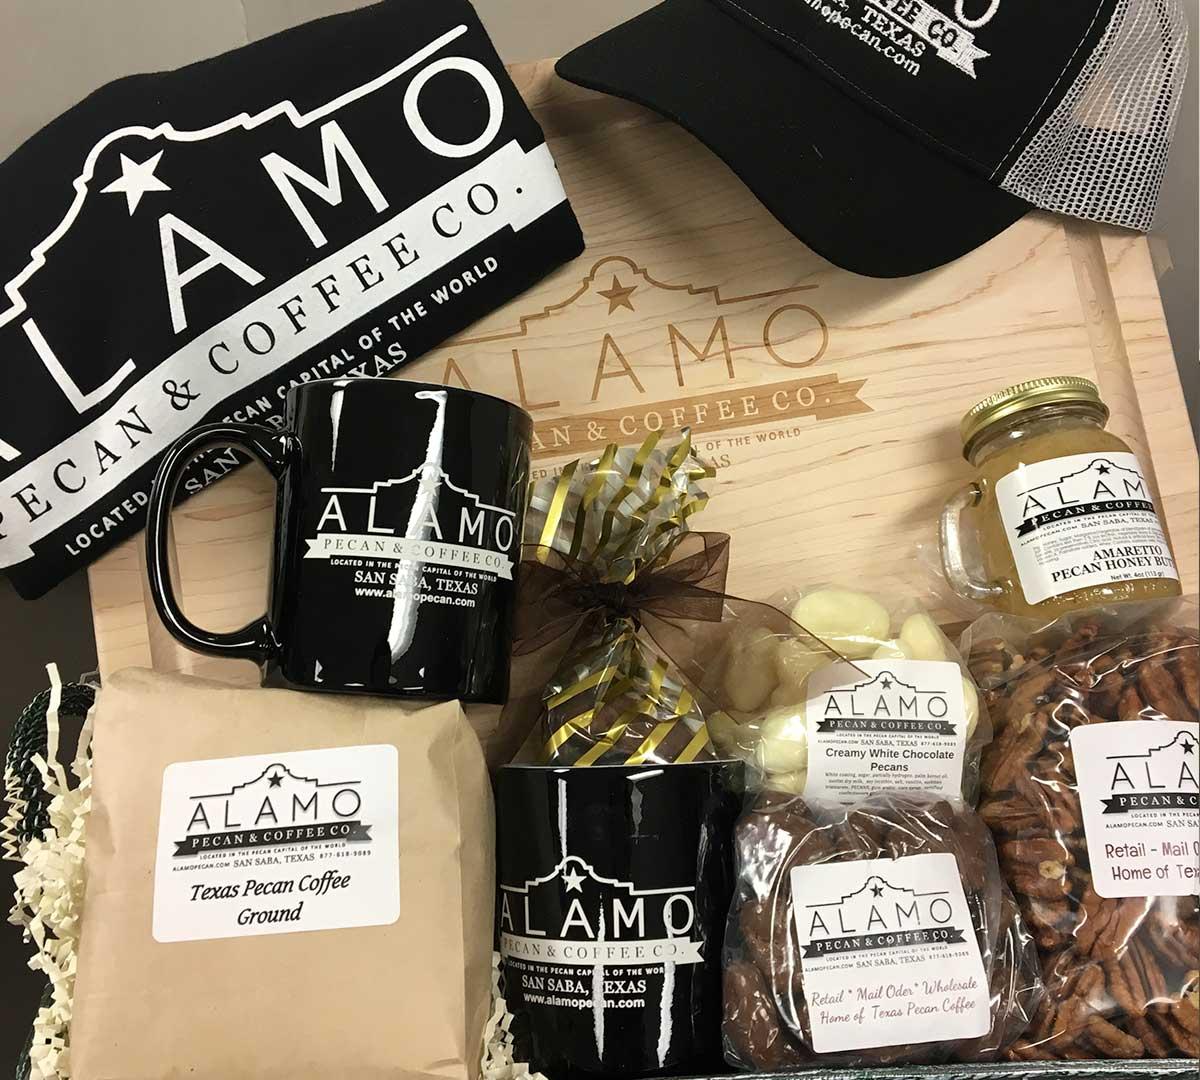 THE ALMO ELVES ARE CELEBRATING FALL WITH GIVEAWAY PRICE GALORE !